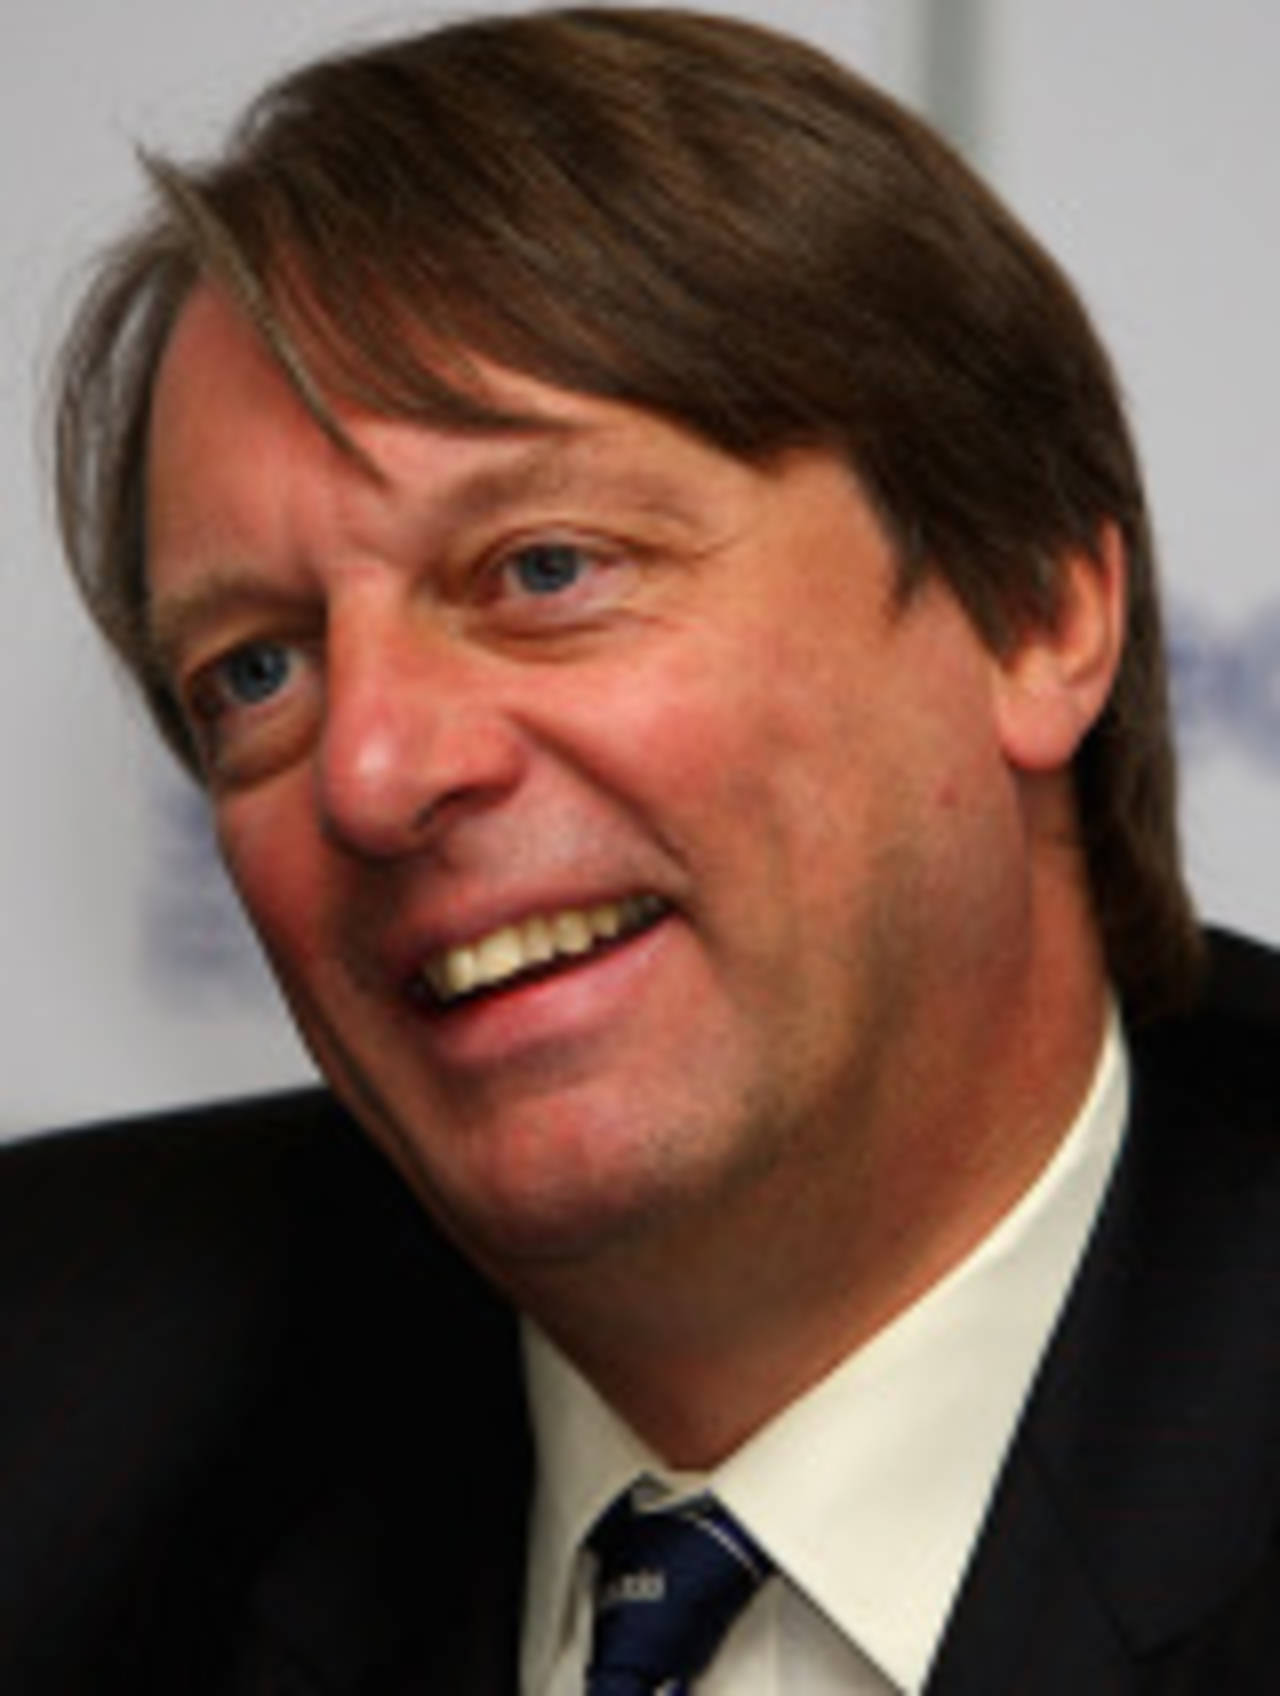 Giles Clarke, the new ECB chairman, addresses a press conference, Lord's, September 26, 2007